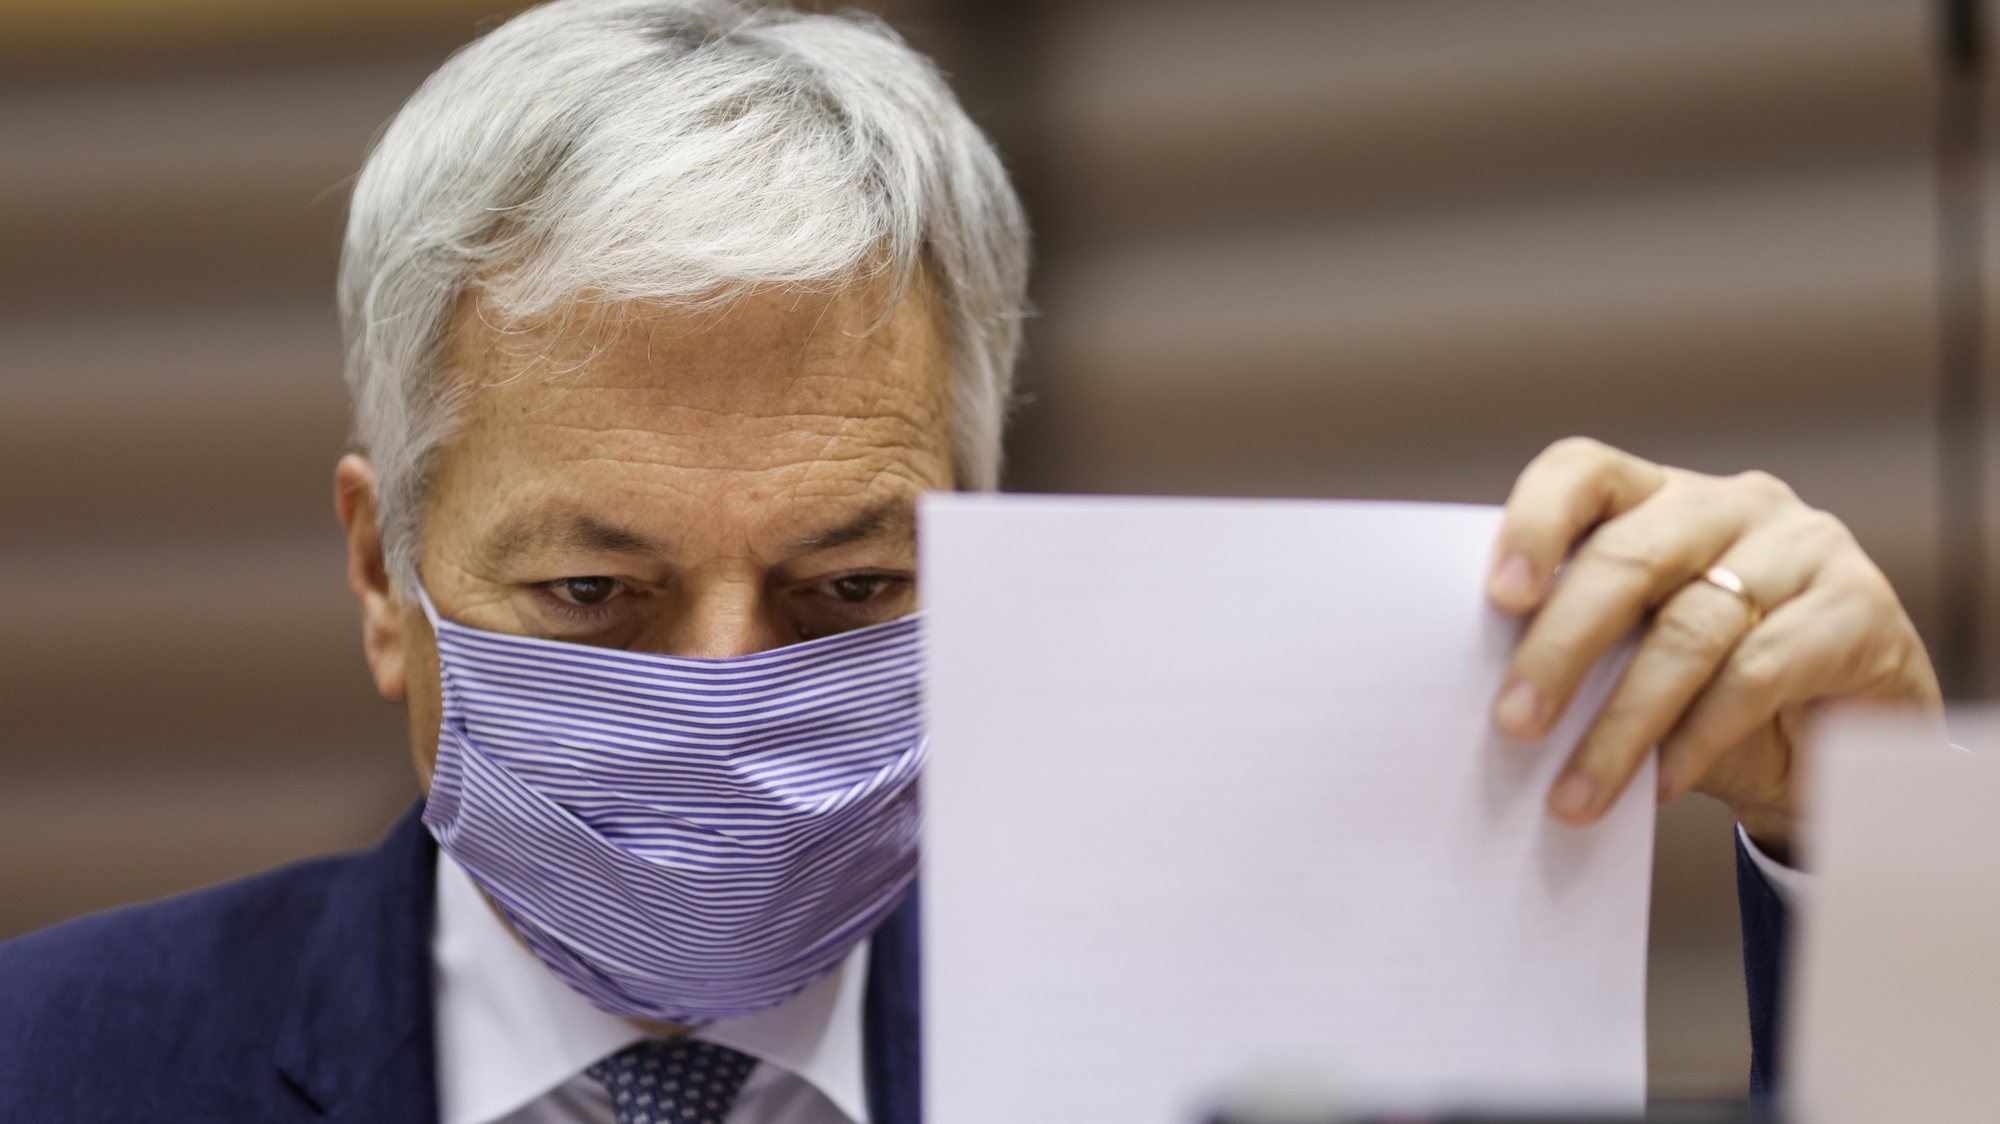 epa08837745 European Commissioner for Justice Didier Reynders, wearing a face mask ,arrives for a plenary session of the European Parliament, Belgium, 23 November 2020.  EPA/KENZO TRIBOUILLARD / POOL